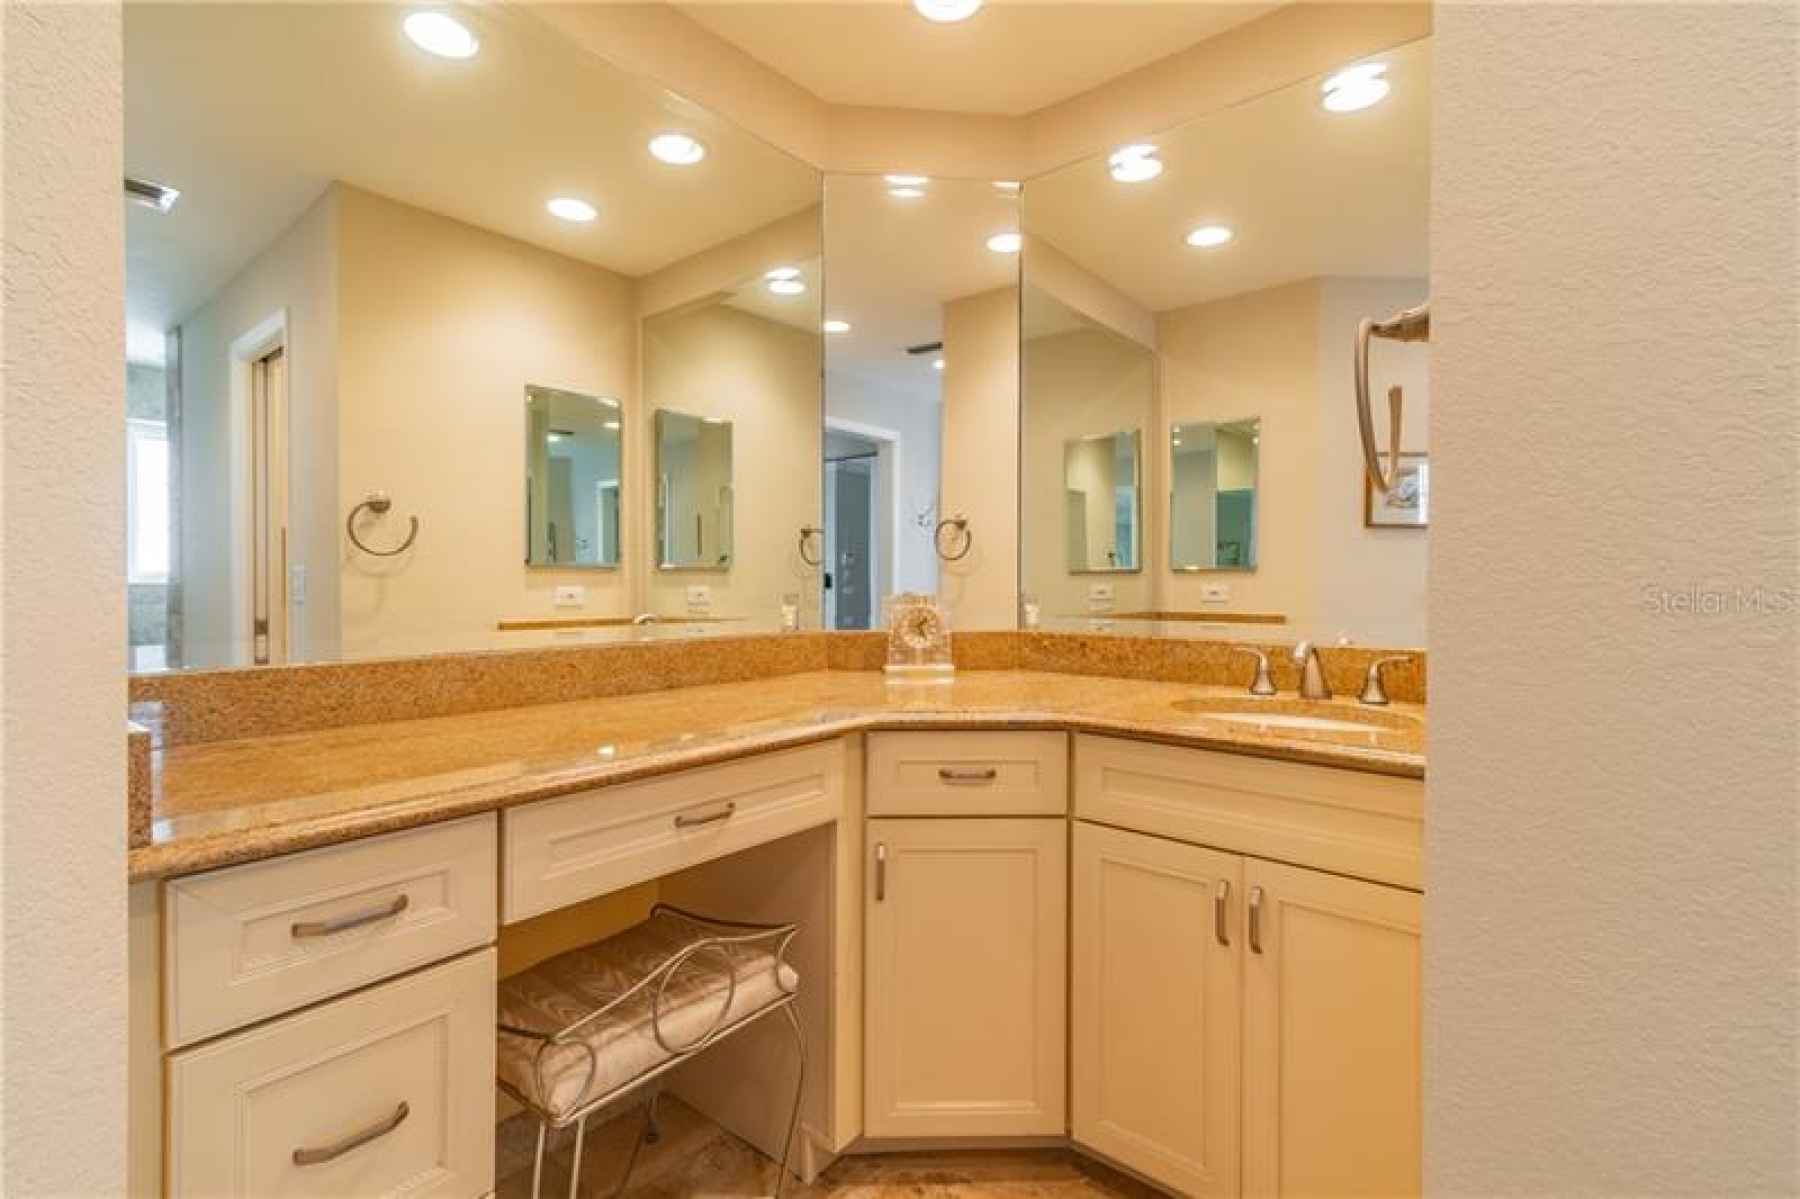 Master bath with granite counters, walk-in shower, water closet and 2 walk-in closets.